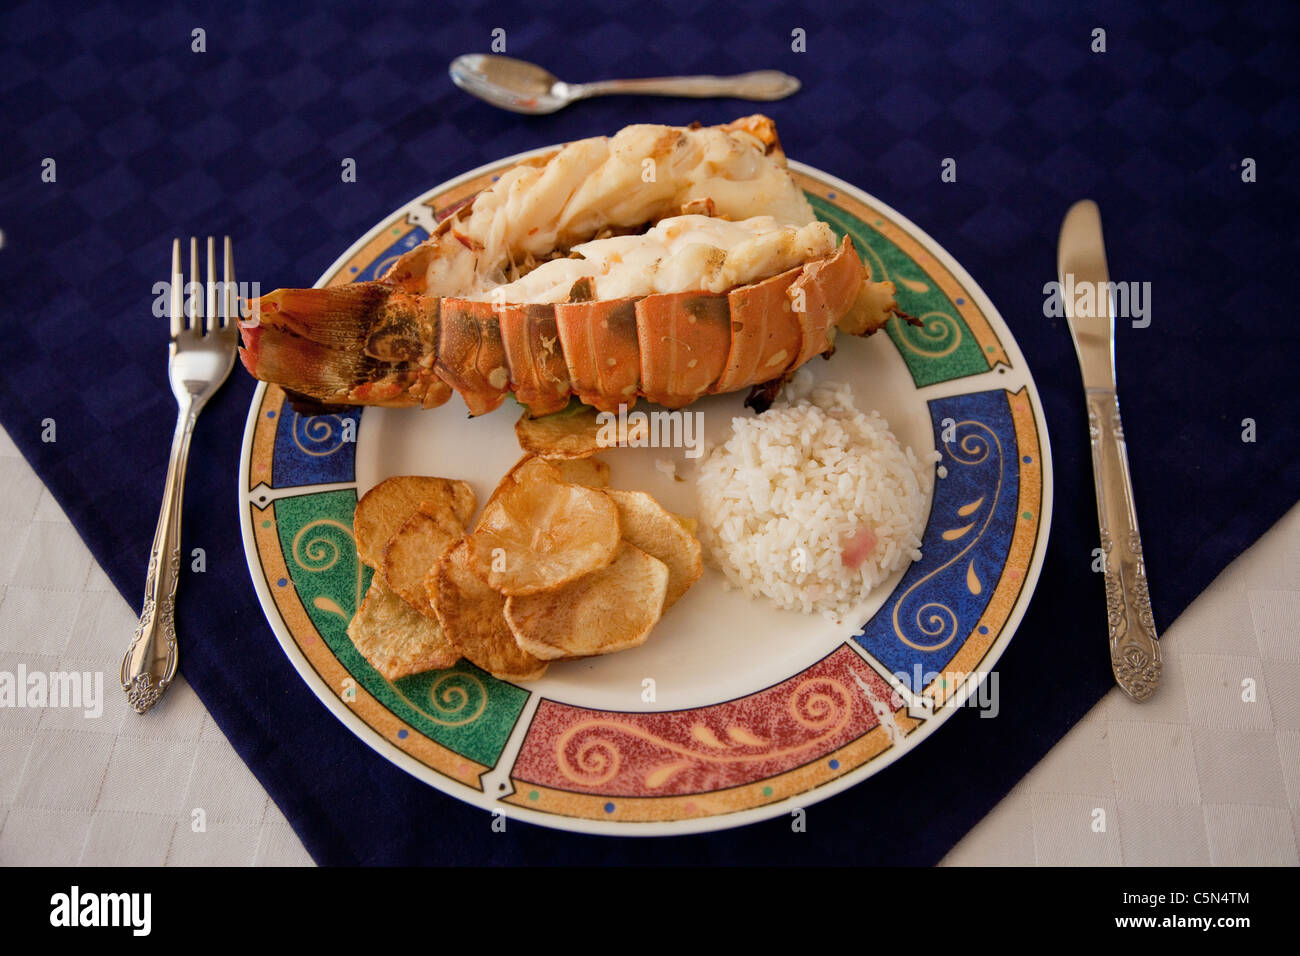 Cuba, Trinidad. Lobster Lunch. with Rice and Plantain Chips. Stock Photo